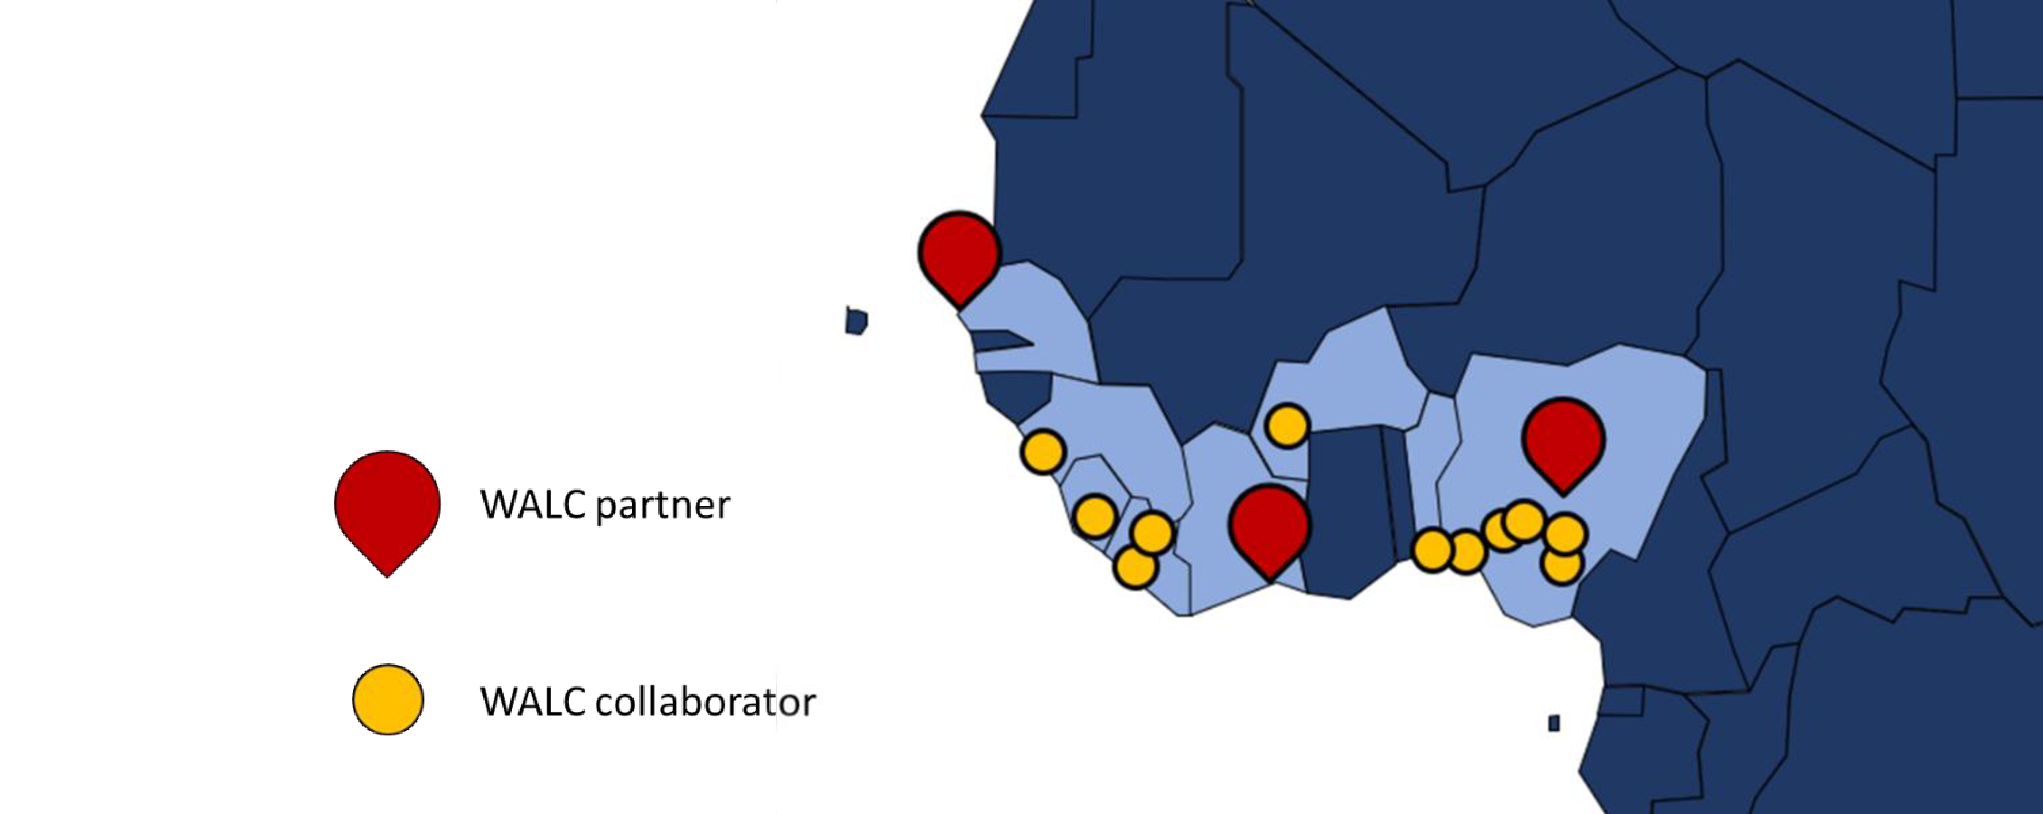 Location of WALC partners and collaborators in West Africa